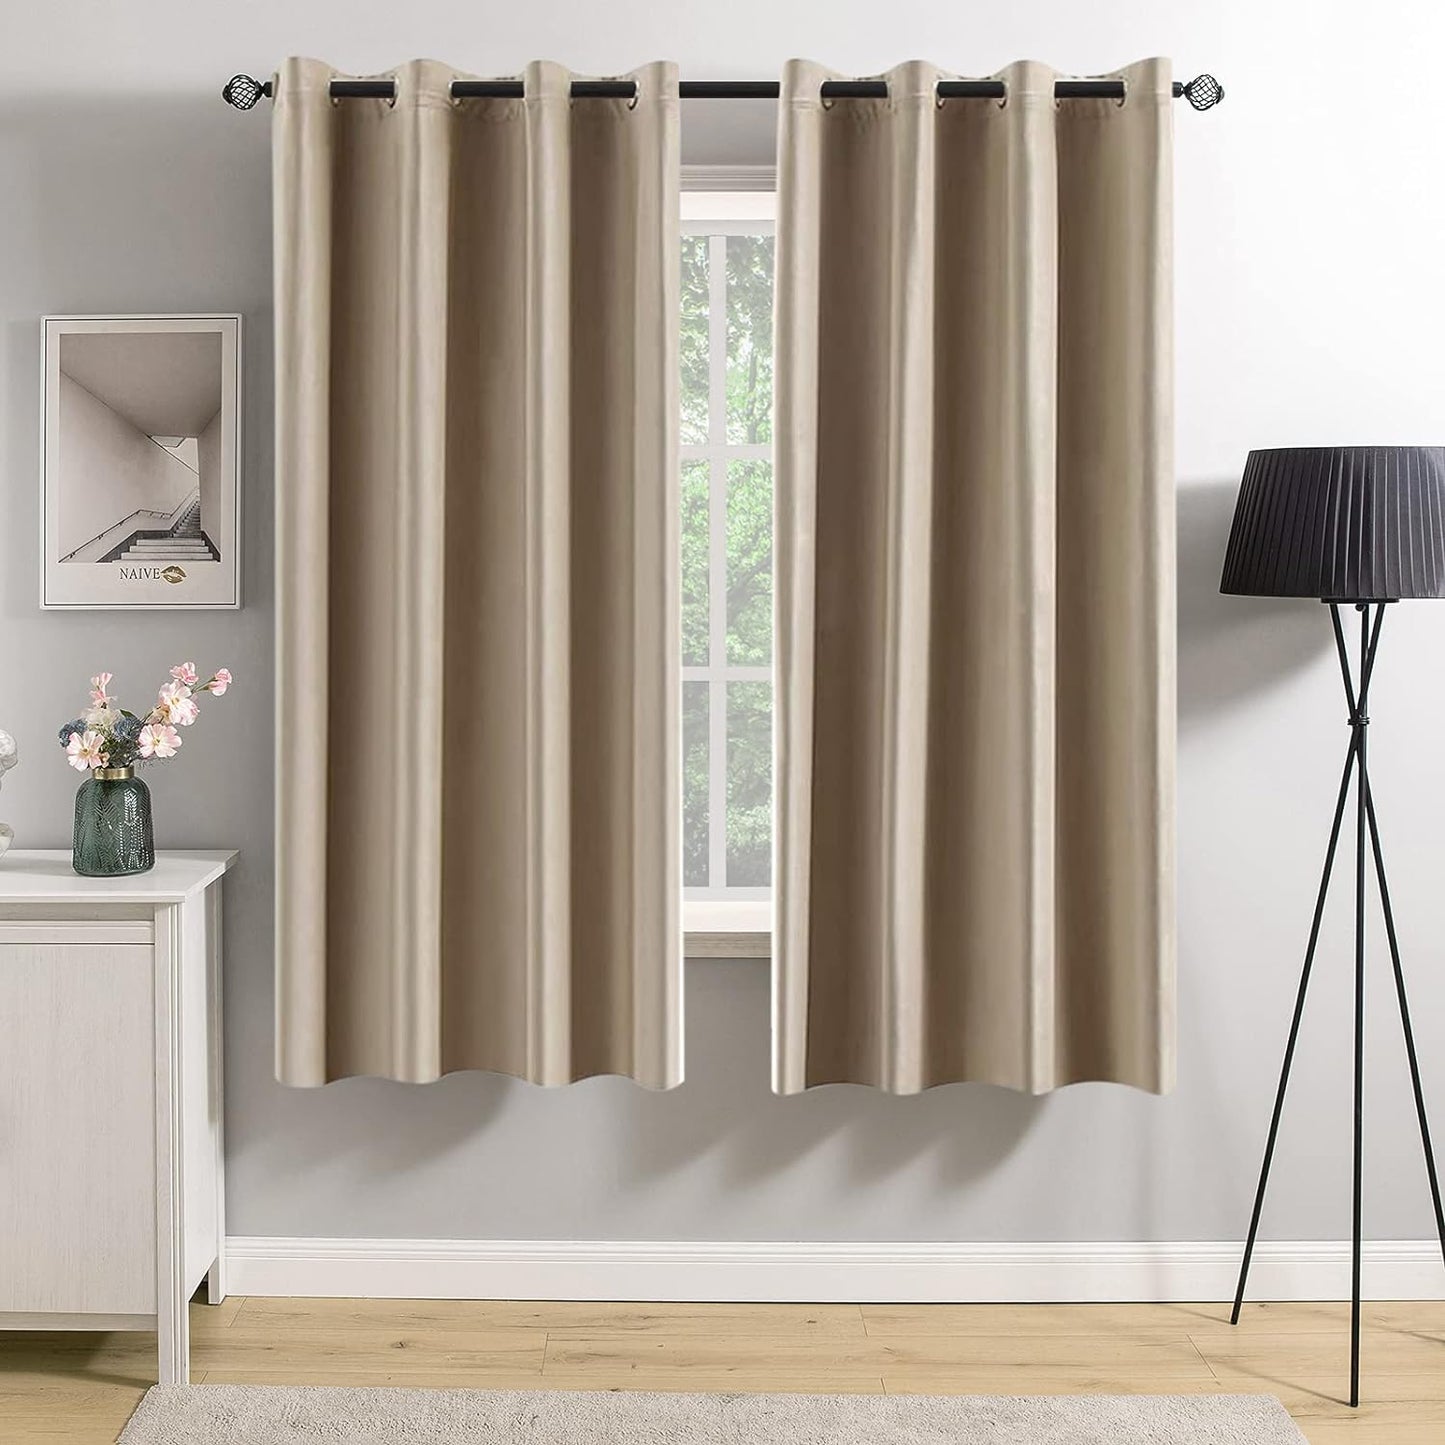 MIULEE Velvet Curtains Olive Green Elegant Grommet Curtains Thermal Insulated Soundproof Room Darkening Curtains/Drapes for Classical Living Room Bedroom Decor 52 X 84 Inch Set of 2  MIULEE Camel Beige W52 X L63 